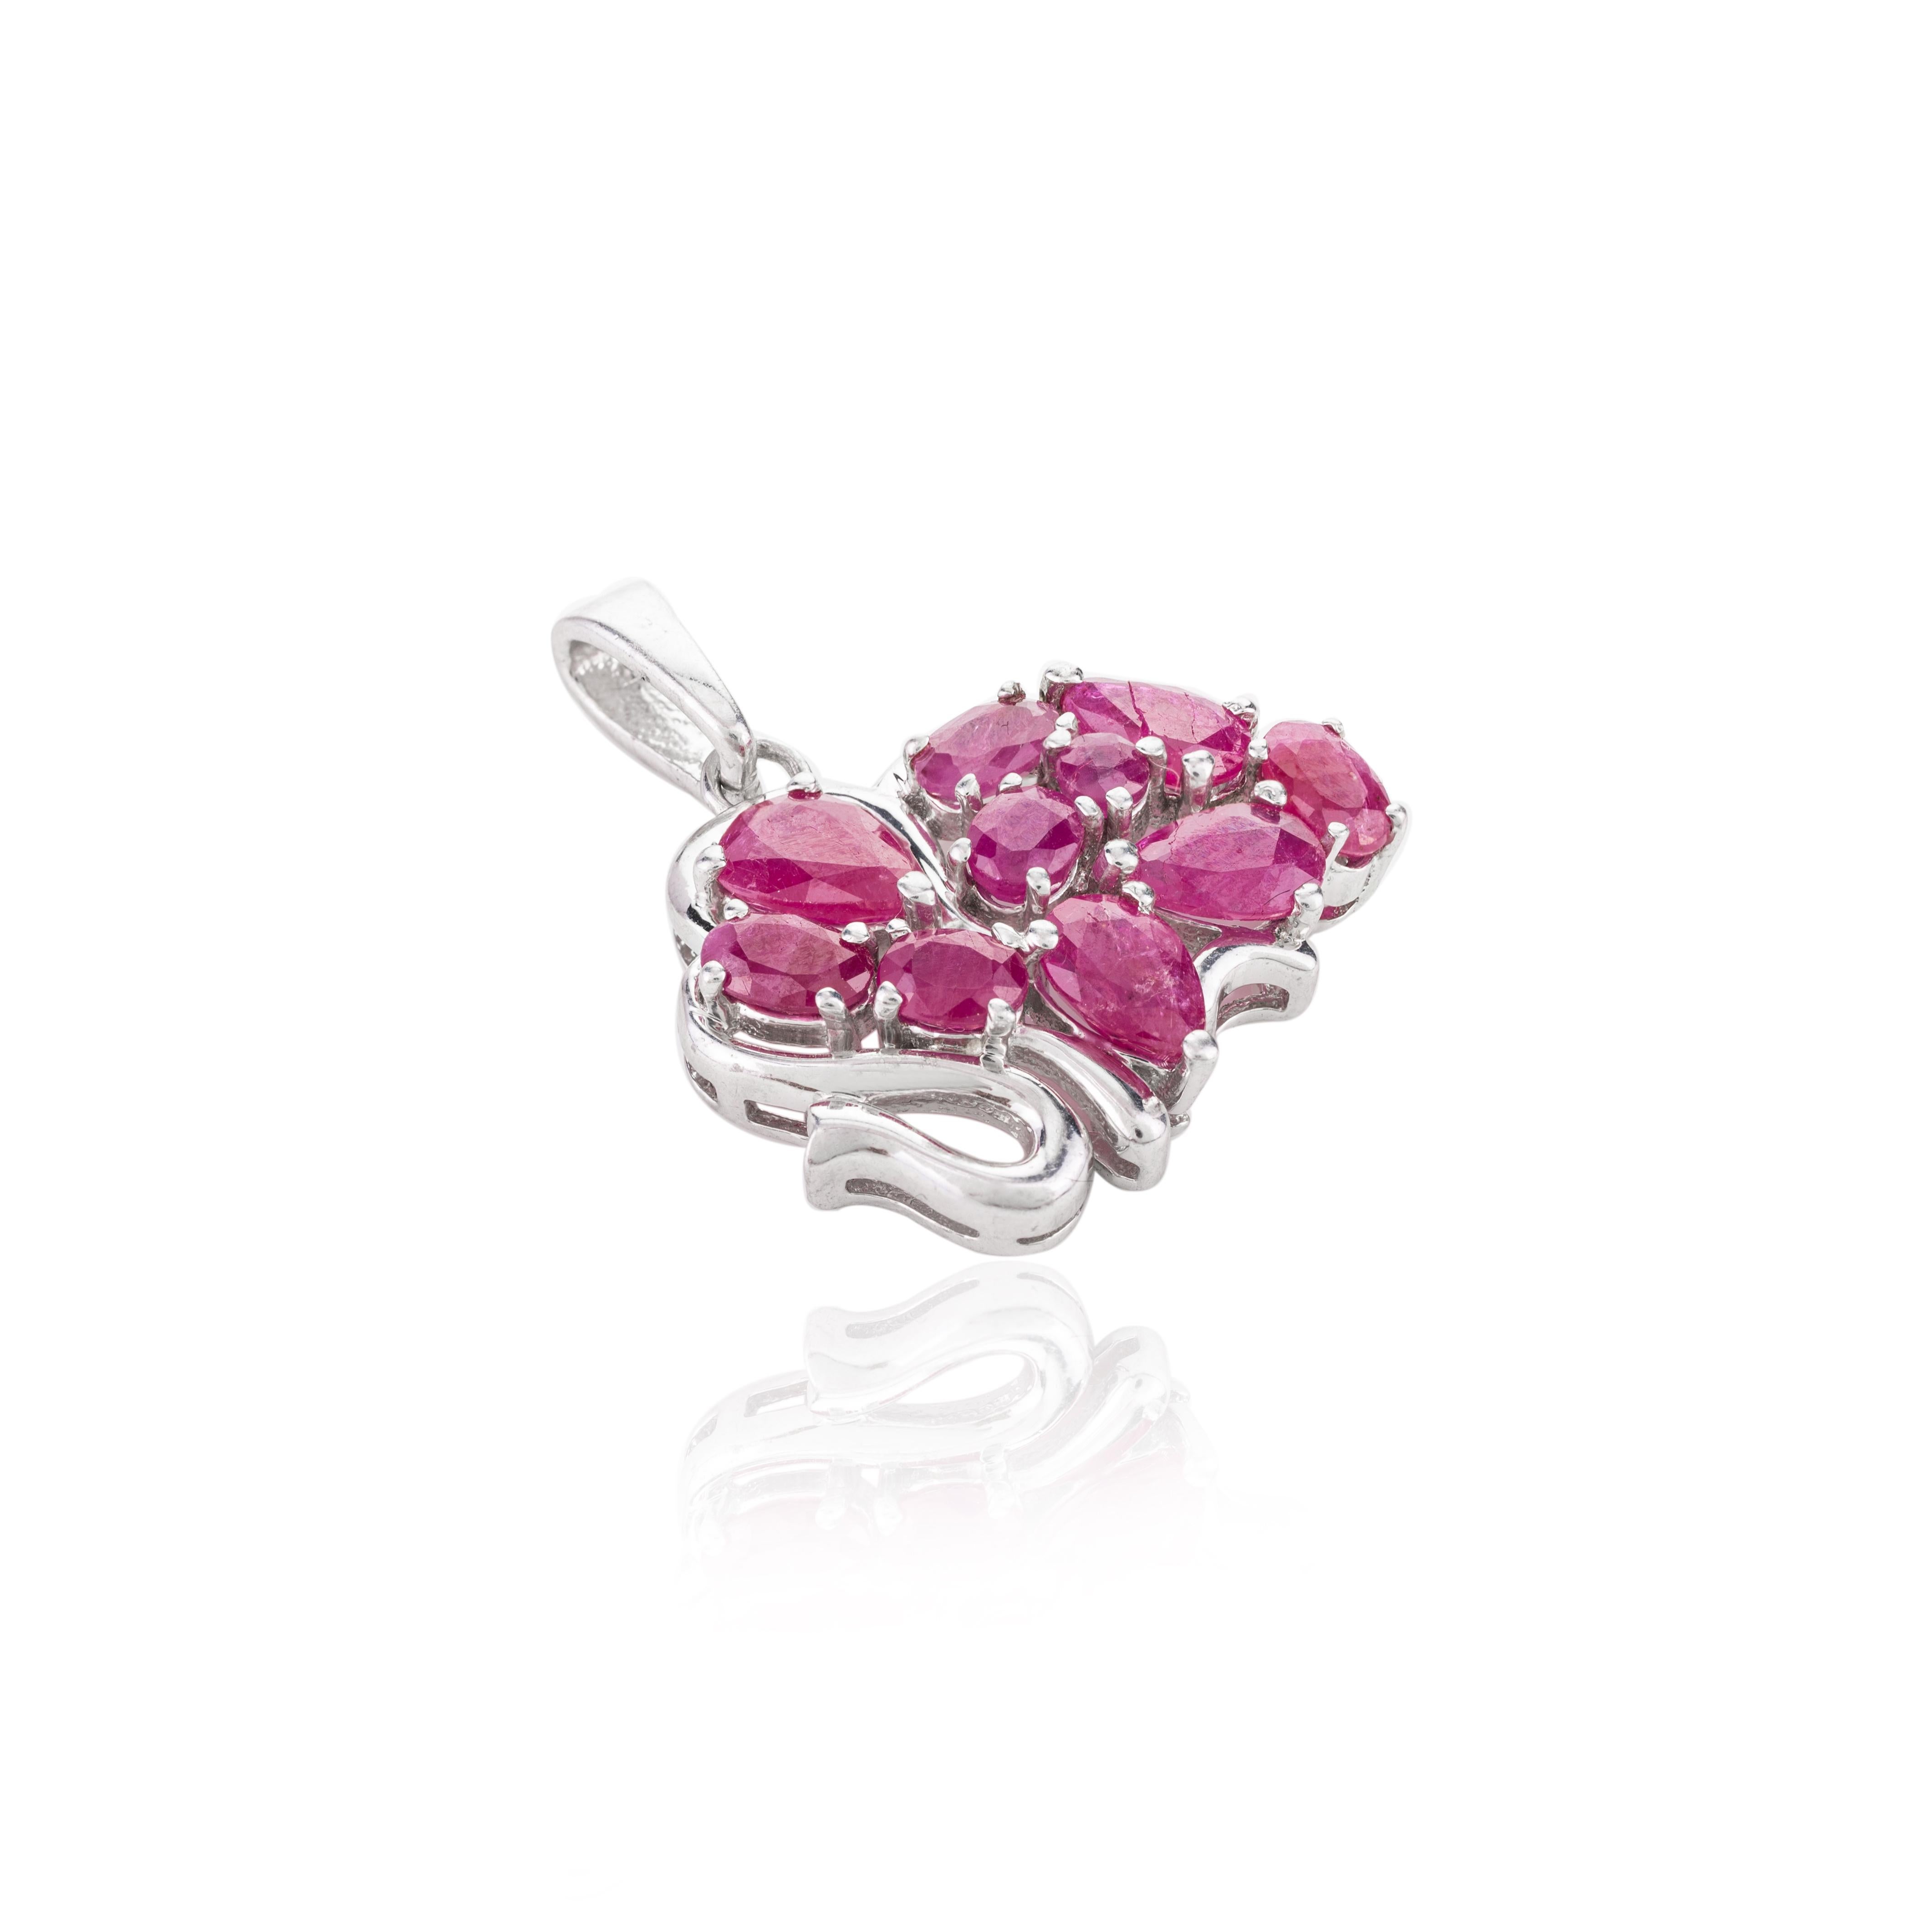 Mixed Cut Ruby Birthstone Sterling Silver Elephant Pendant Gifts, 925 Silver Jewelry For Sale